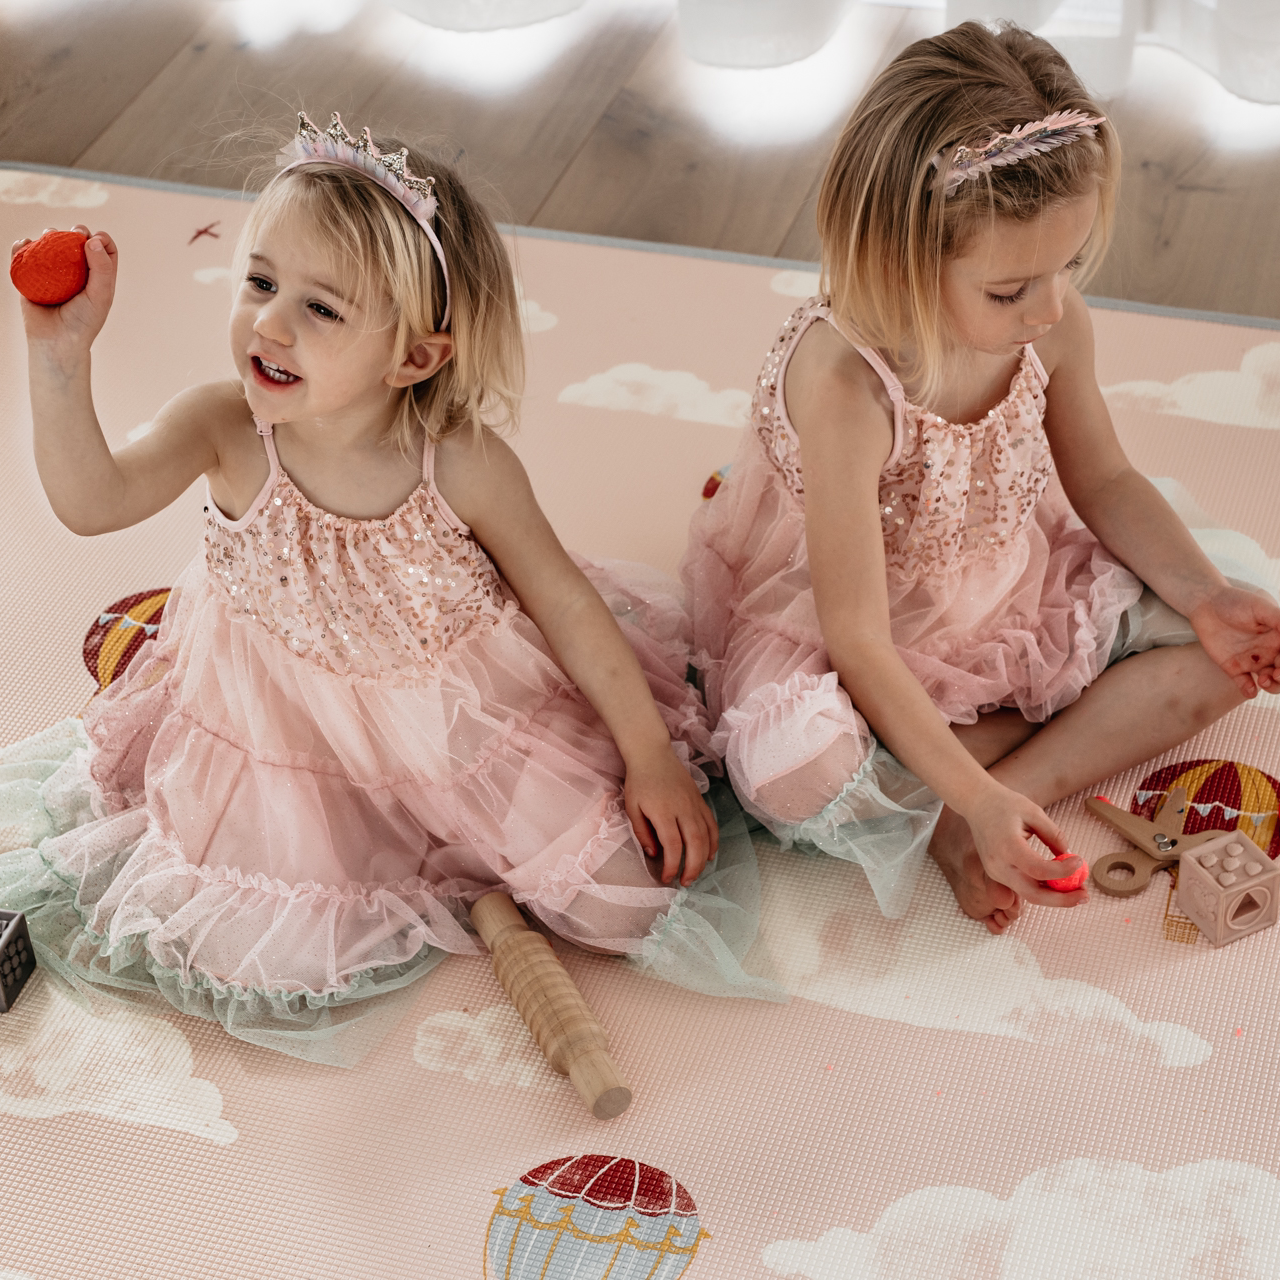 Sunset Geo/ In the clouds Pink Play Mat (Small)